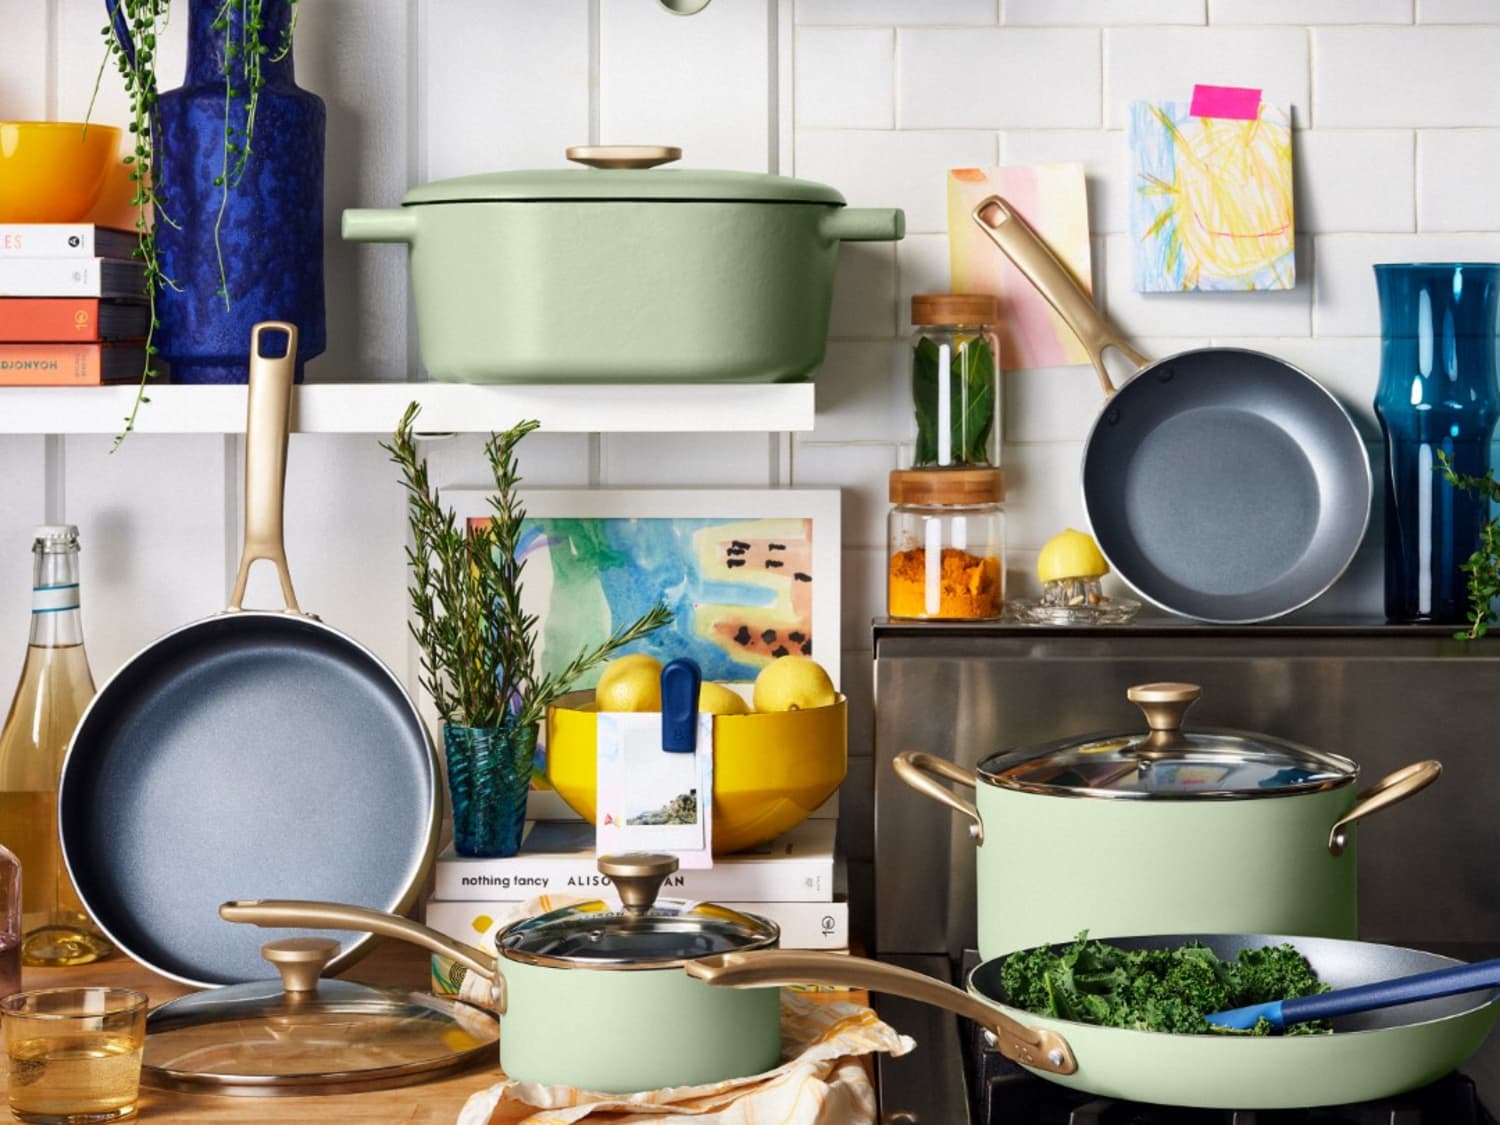 https://cdn.apartmenttherapy.info/image/upload/f_jpg,q_auto:eco,c_fill,g_auto,w_1500,ar_4:3/gen-workflow%2Fproduct-database%2FBeautiful-drew-barrymore-cookware